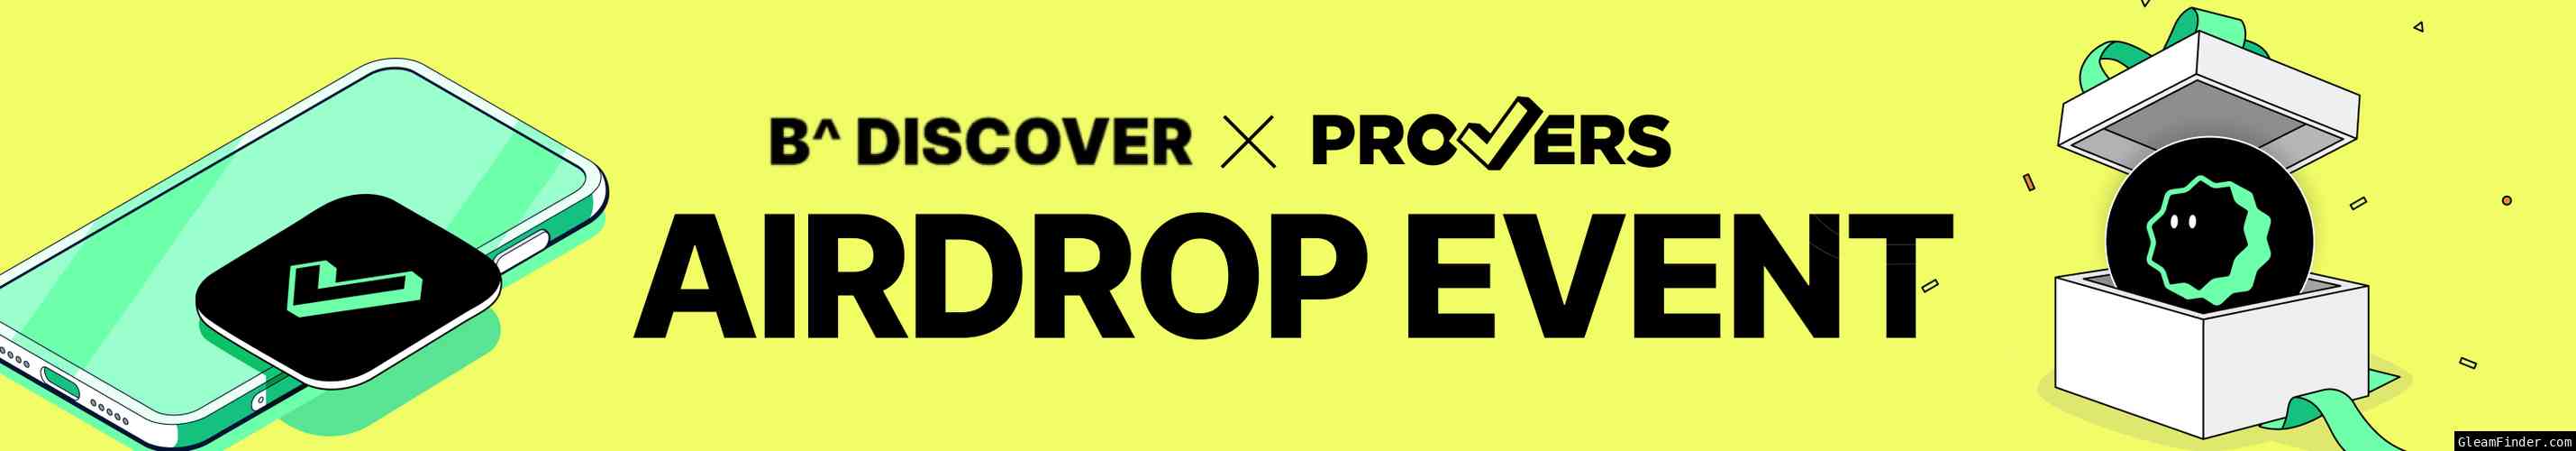 B^DISCOVER X PROVERS AIRDROP EVENT